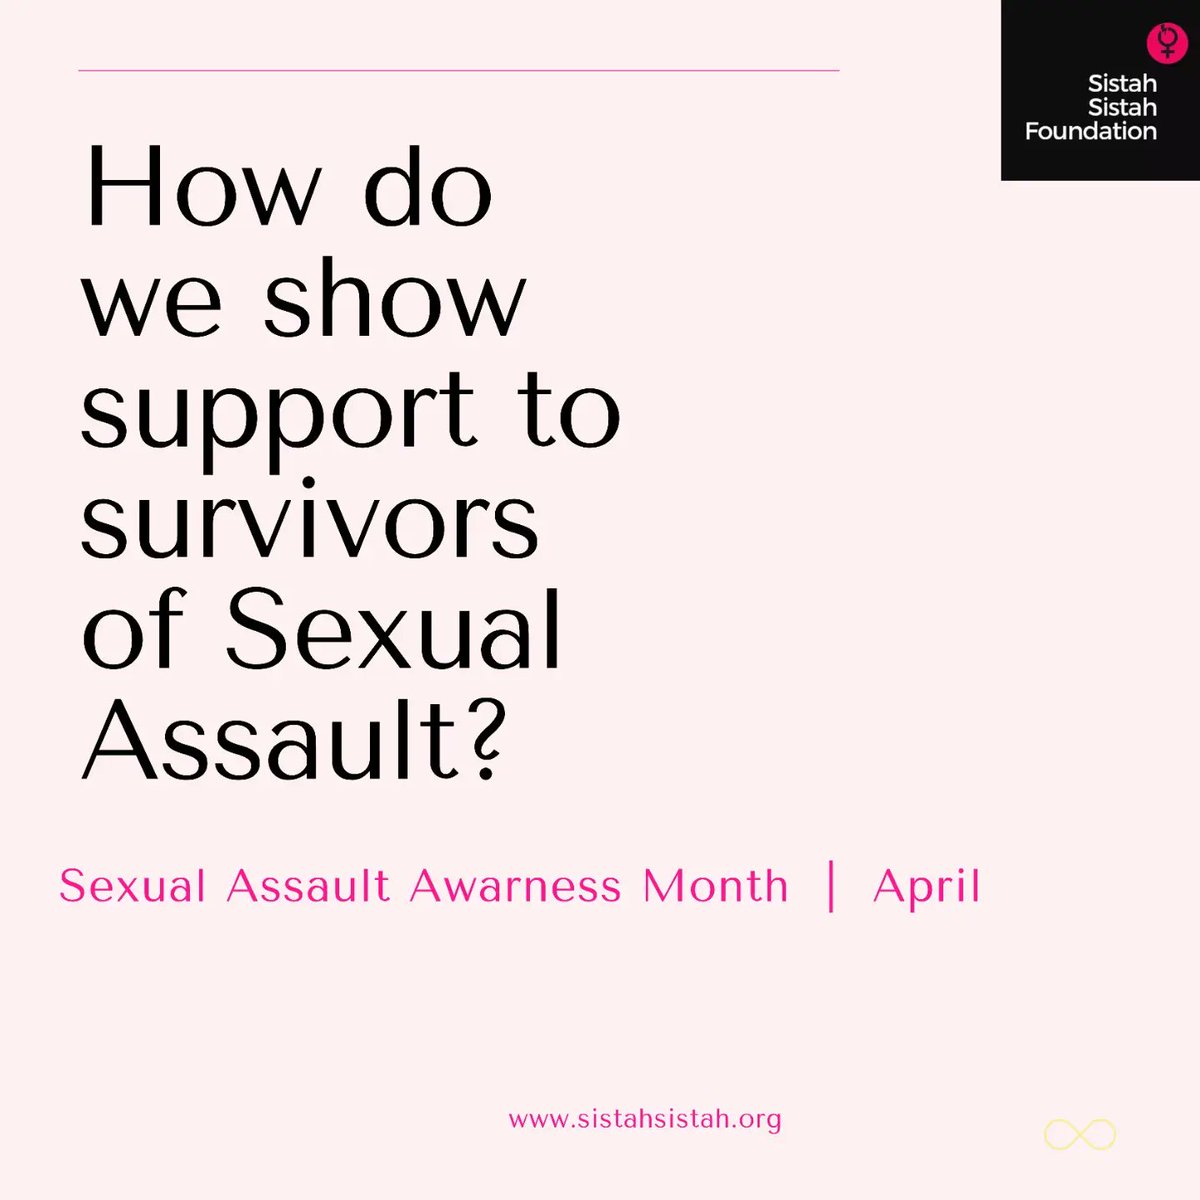 Today, we are sharing five ways to support survivors and victims of sexual assault. From listening with empathy to advocating for change, let's create a safer and more compassionate world for all. Showing care, compassion, and help can make a difference in their healing journey.